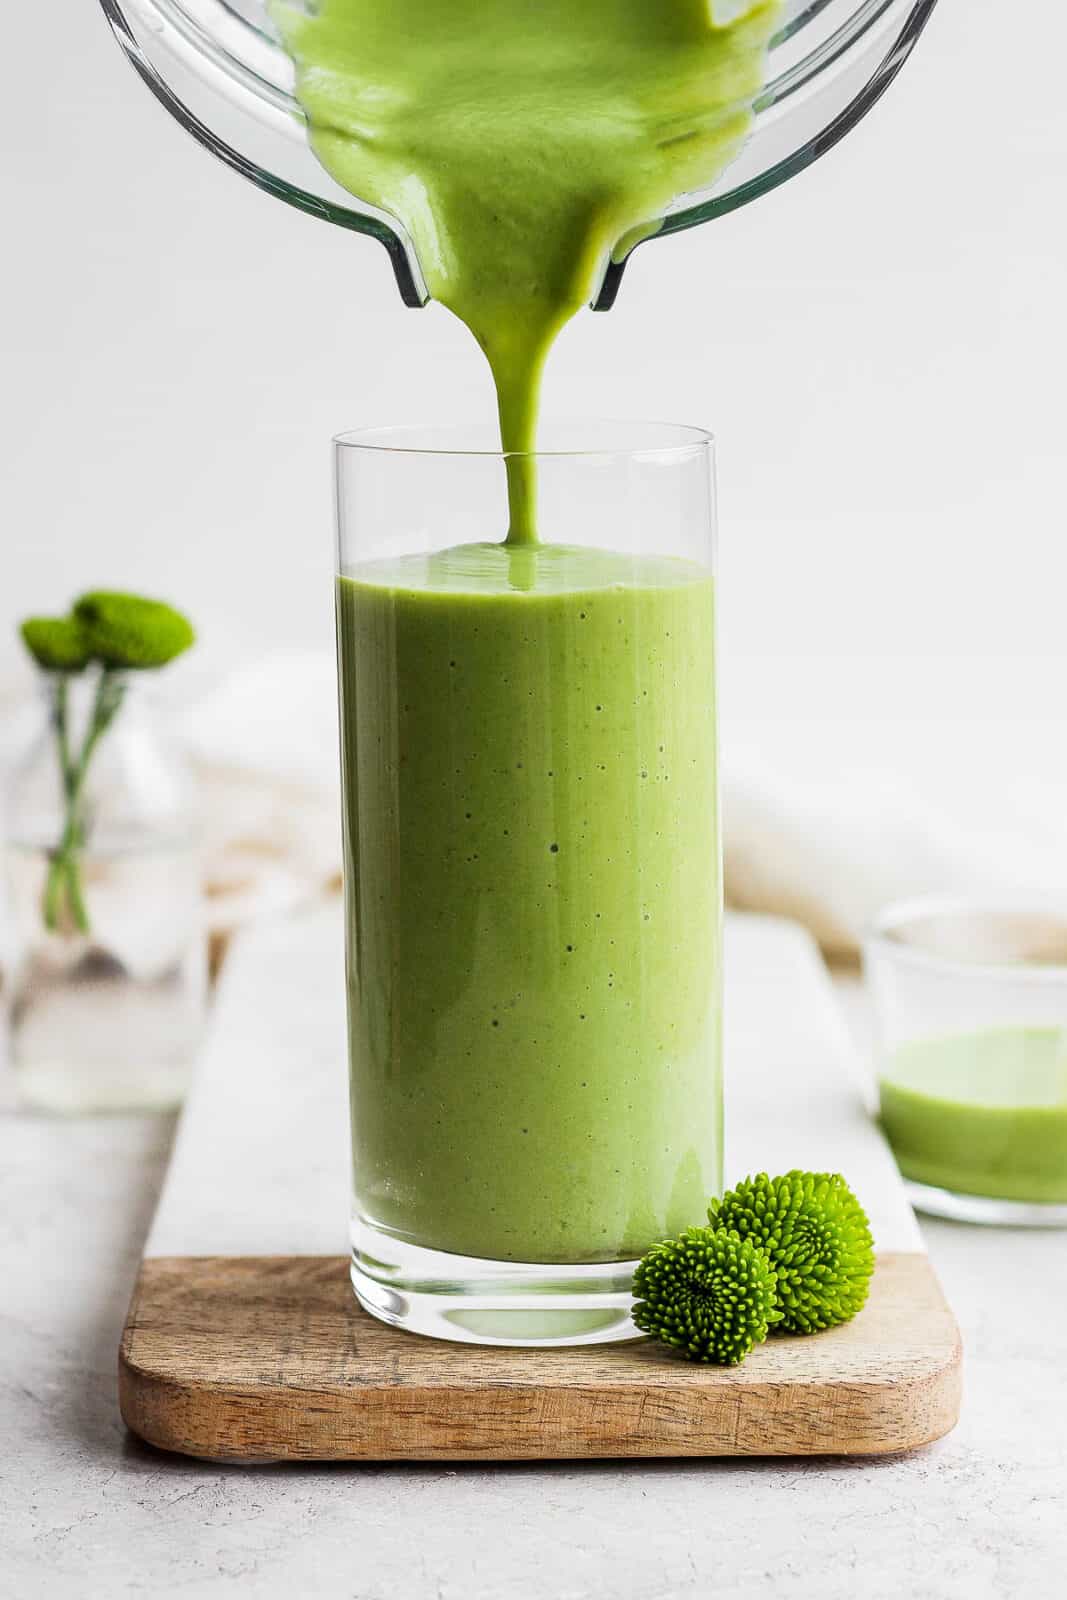 Pouring a green smoothie from the blender into a glass.